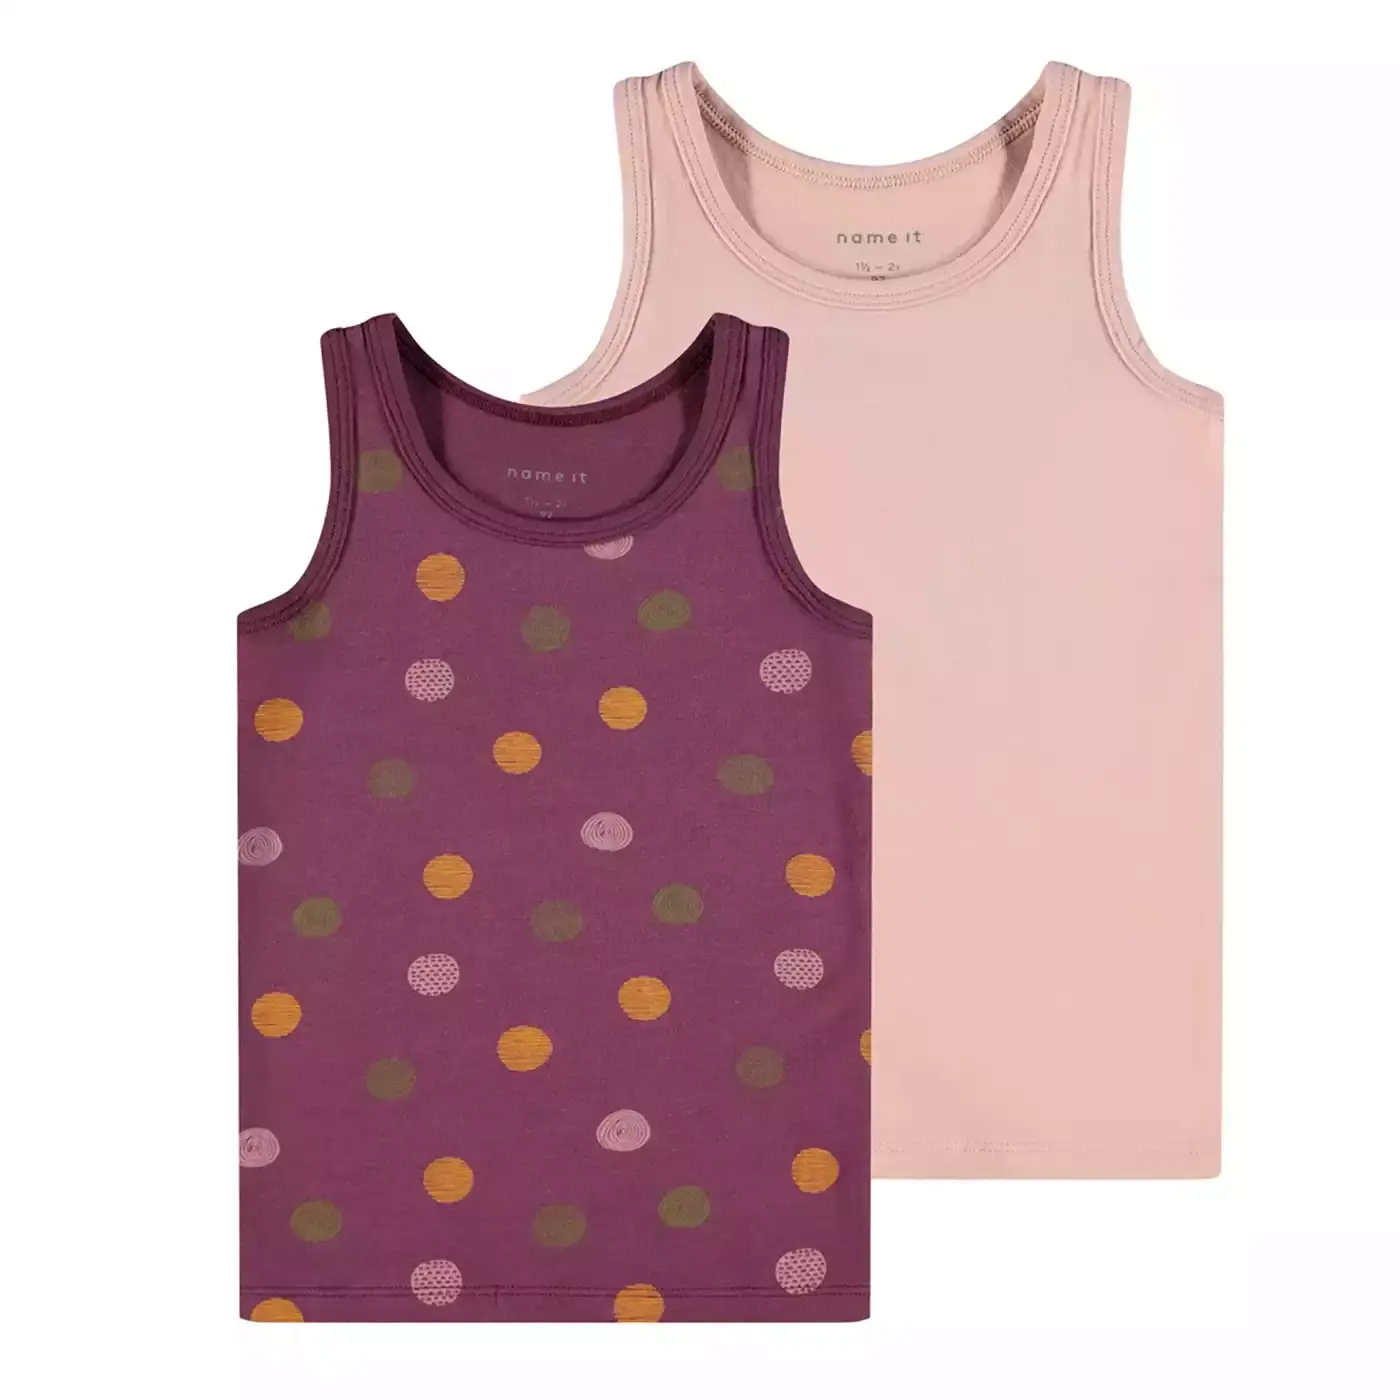 2er-Pack Tank Top Purple name it Rosa Pink Lila M2000580517002 1